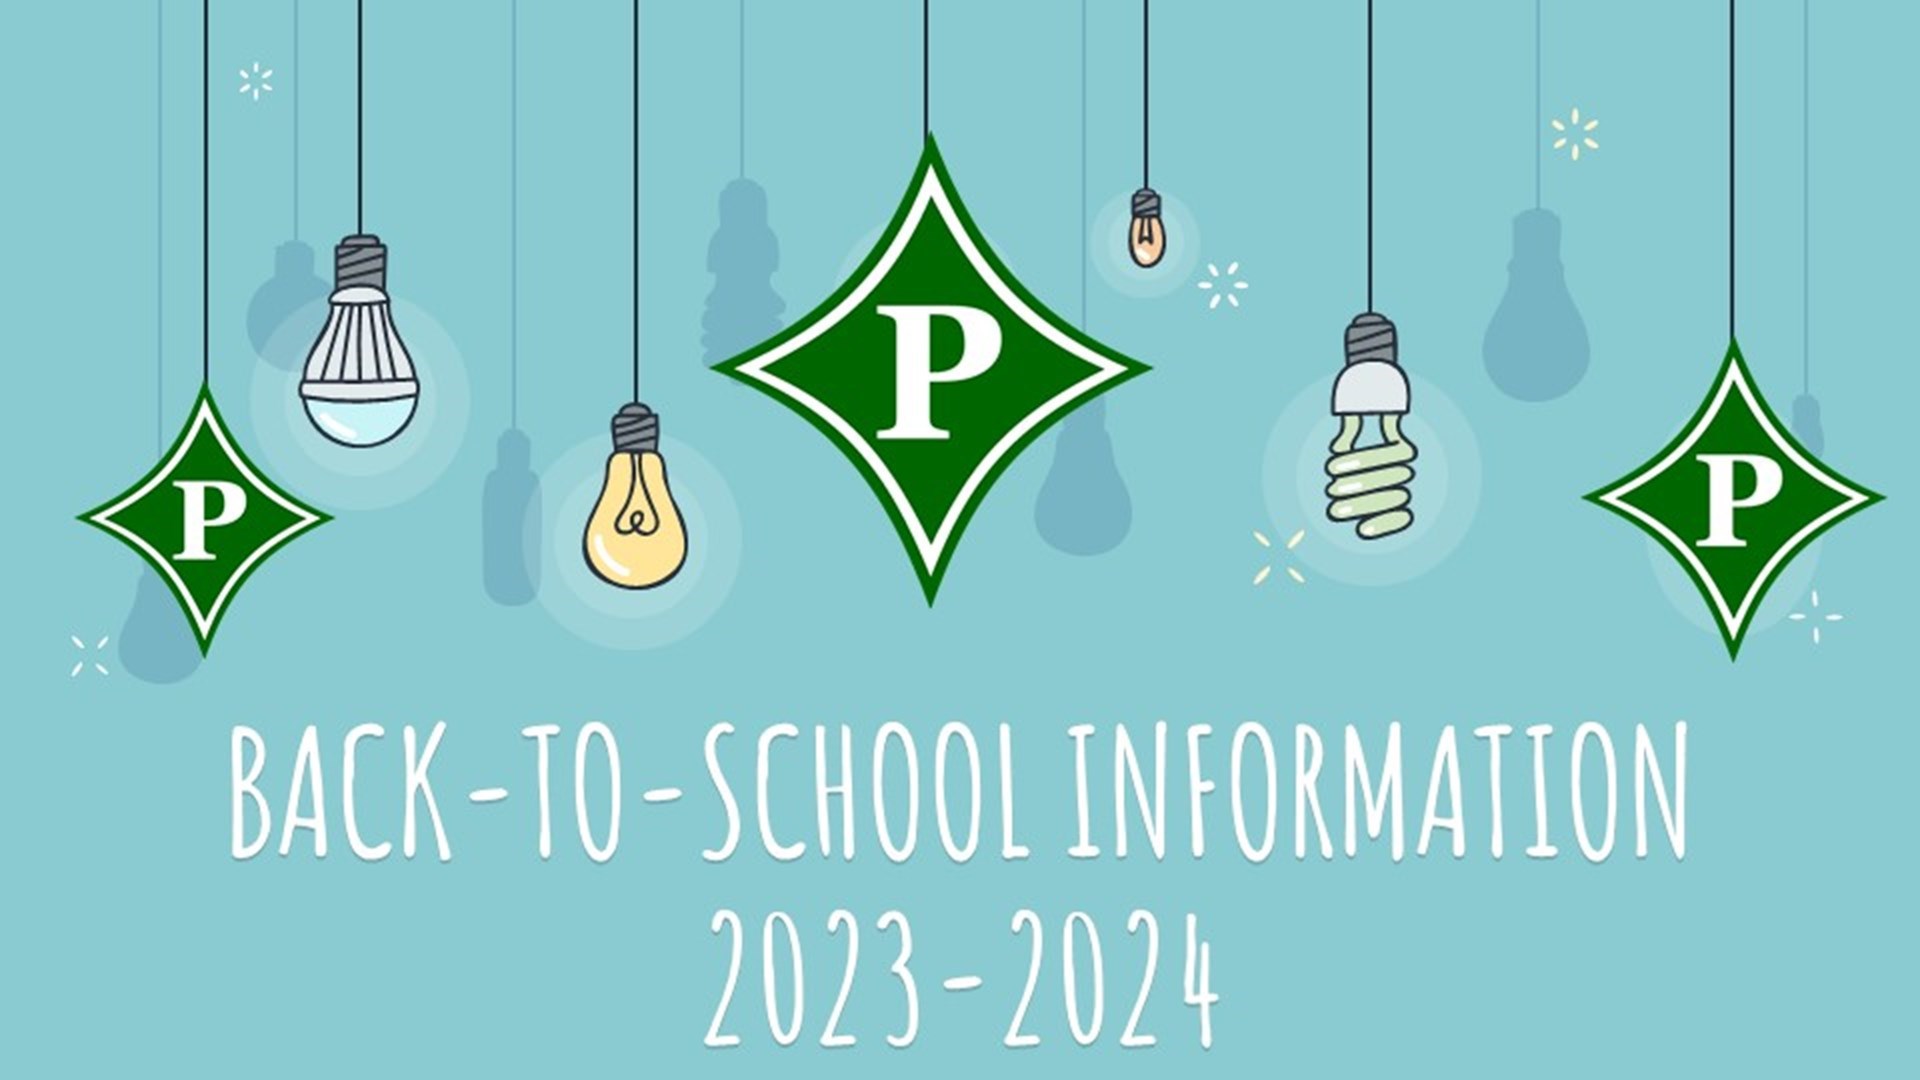 Back-to-school Information 2023-2024